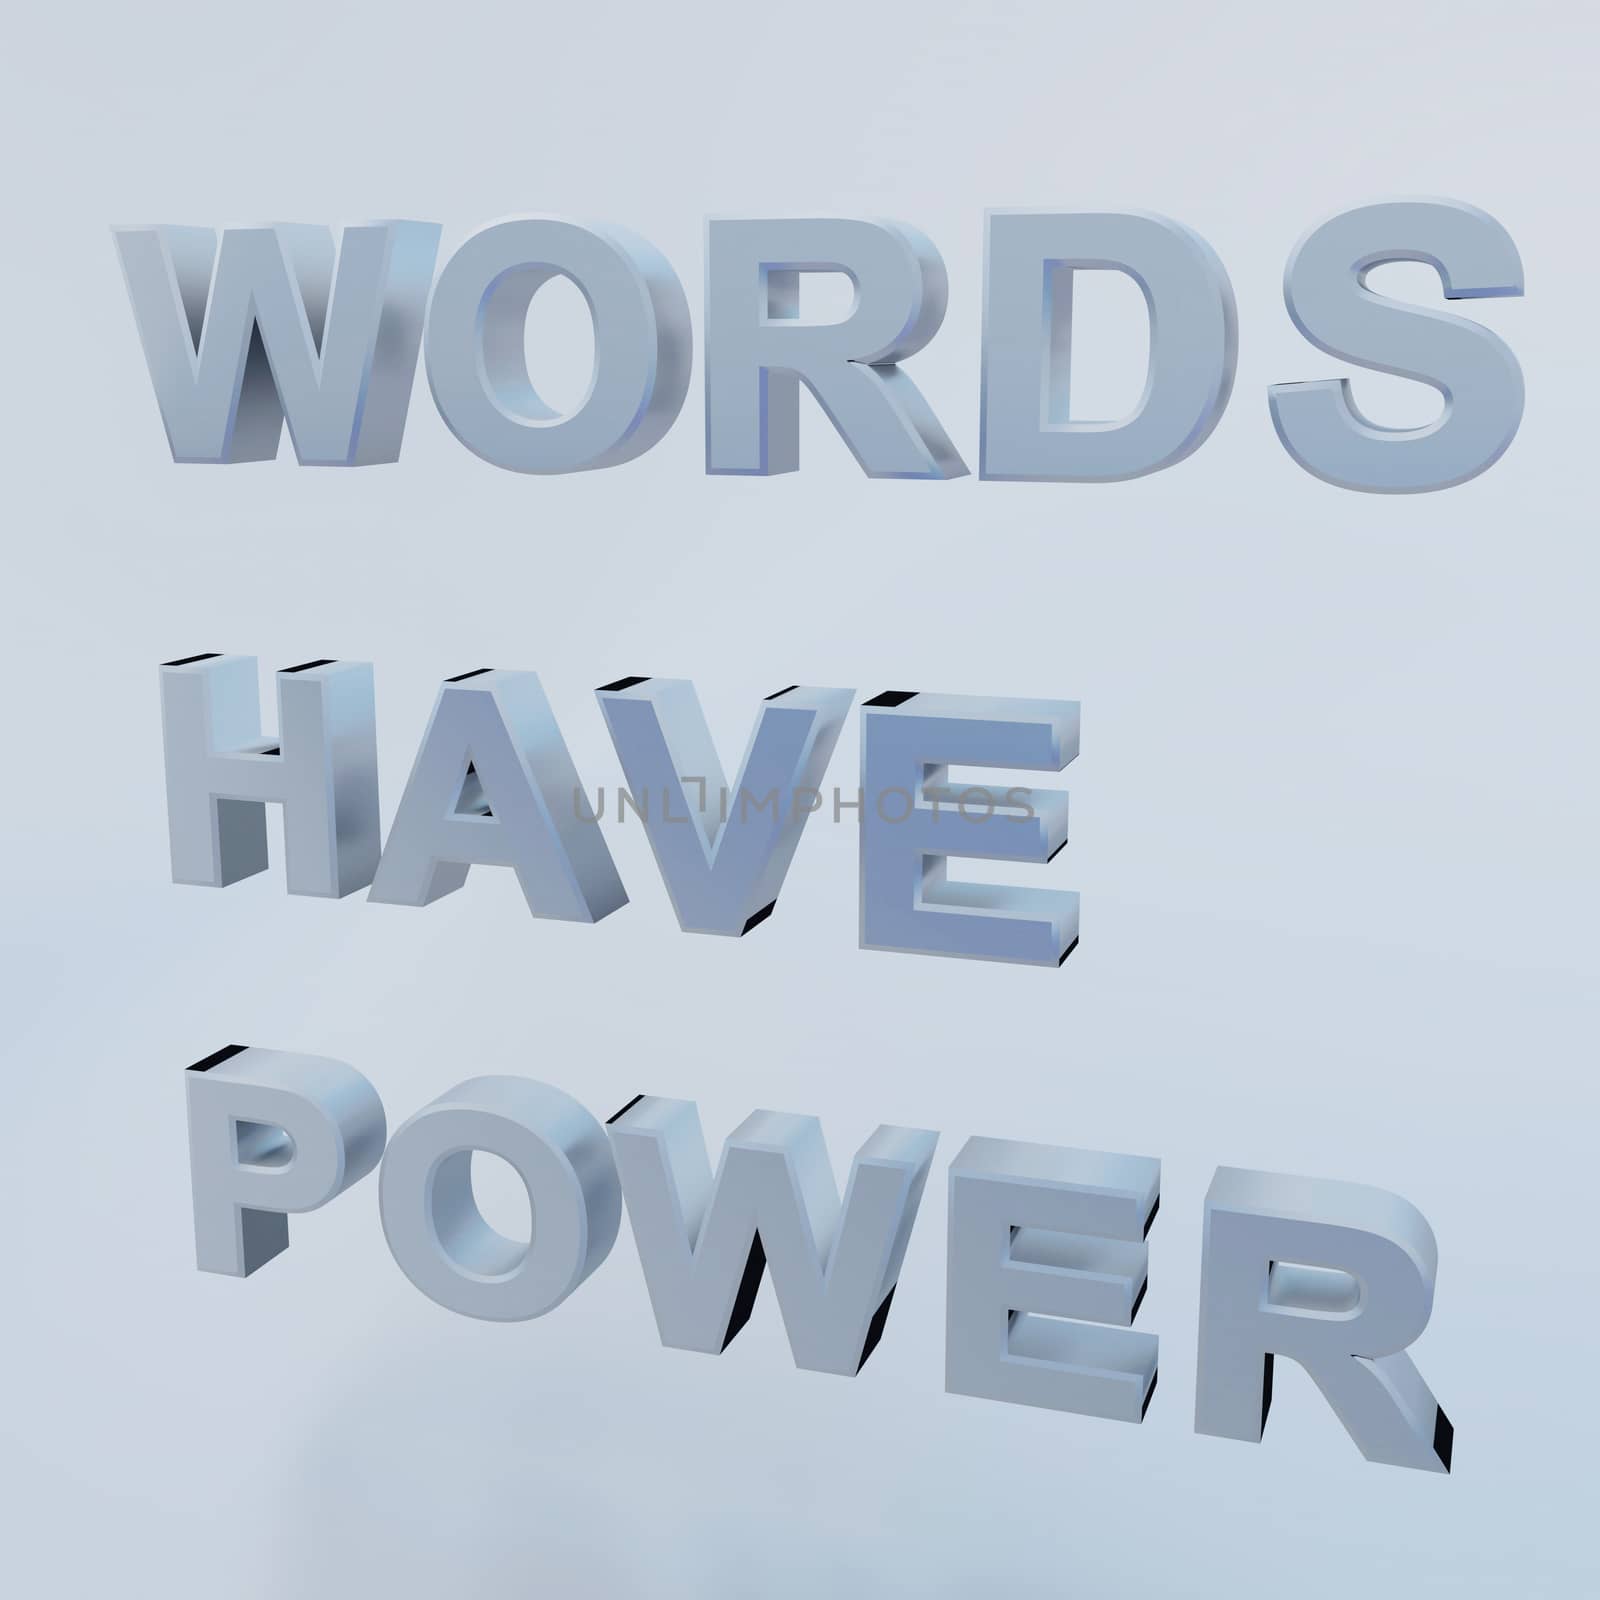 WORDS HAVE POWER concept by HD_premium_shots